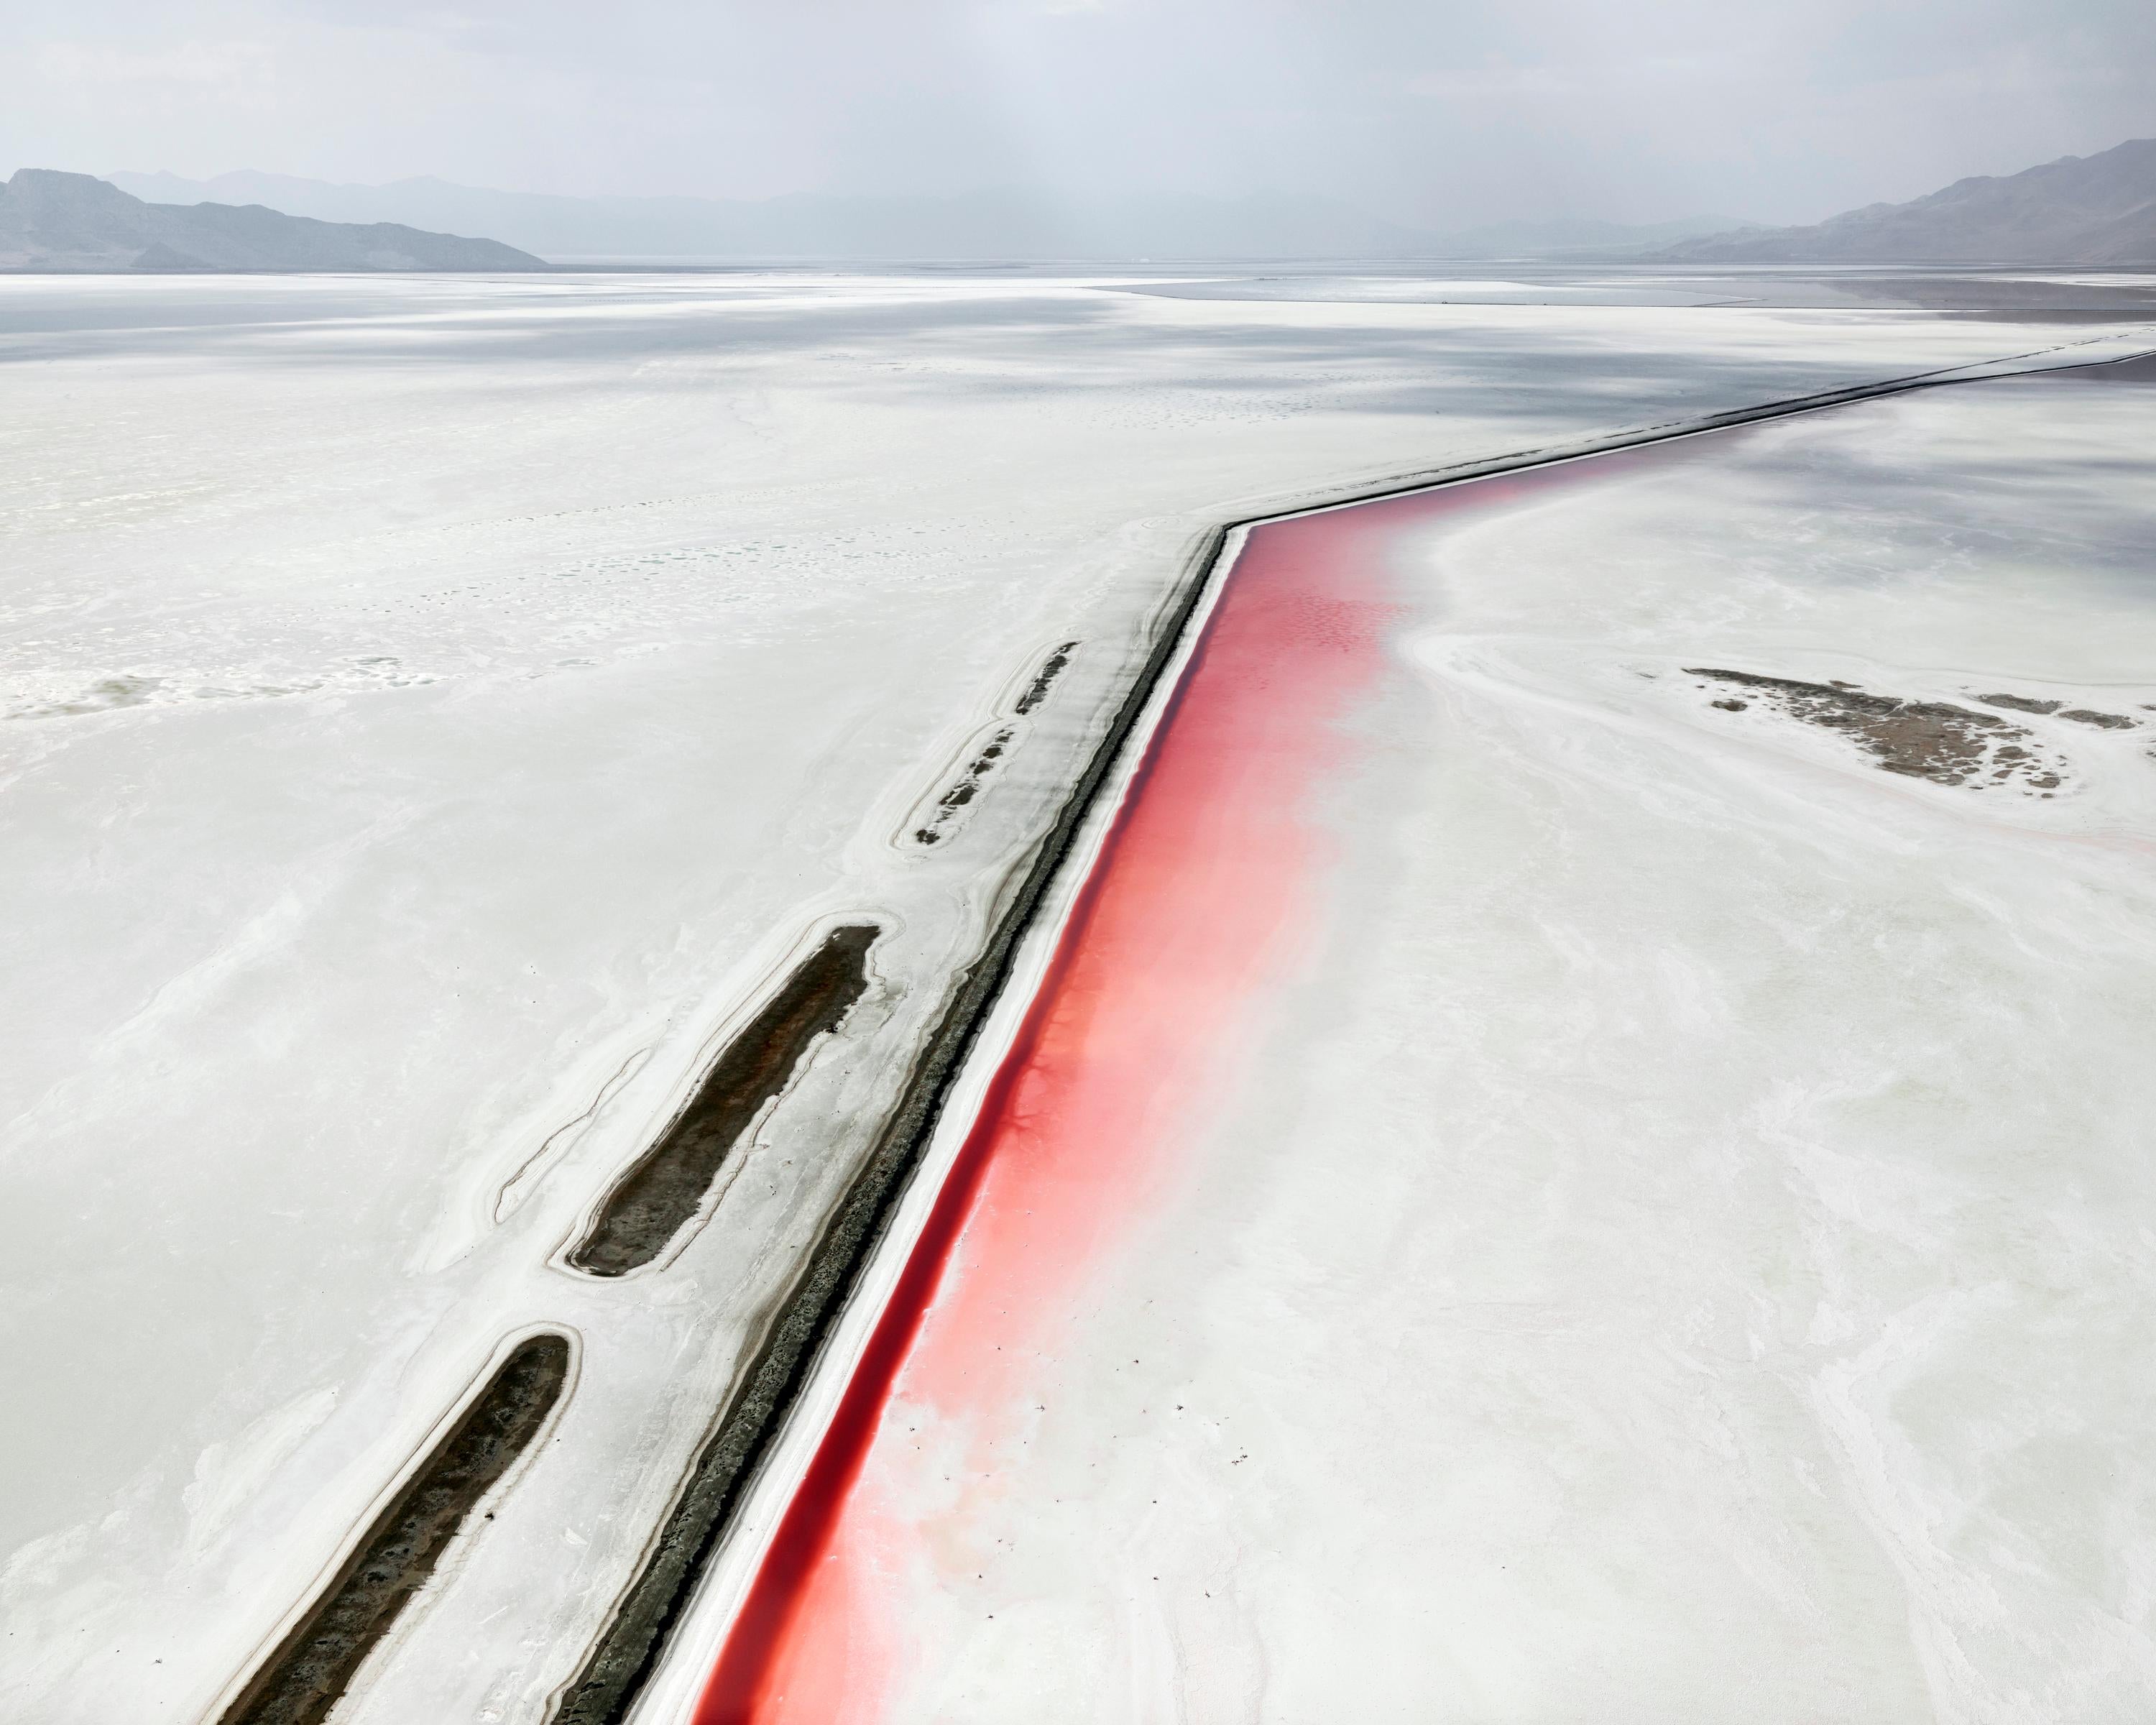 David Burdeny - Red Canal, Great Salt Lake, UT, Photography 2017, Printed After